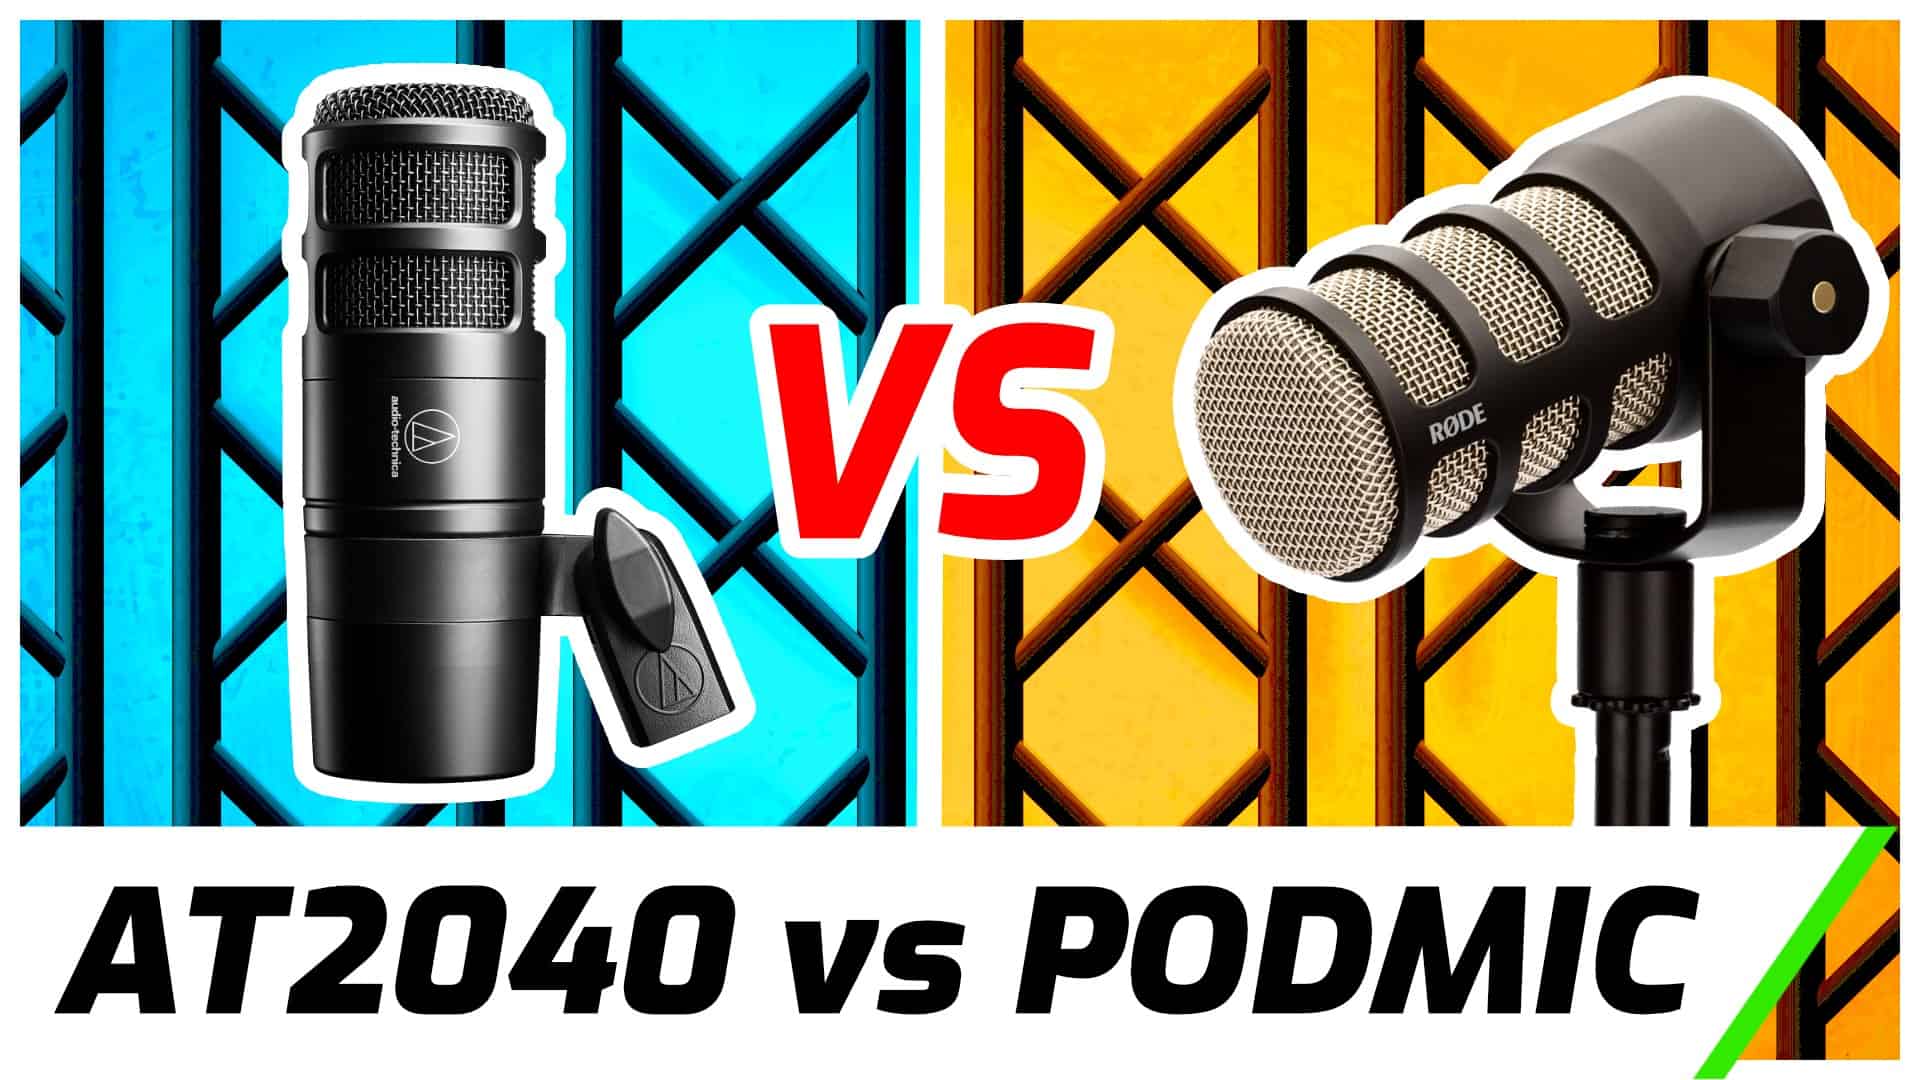 AT2040 Podcast Microphone, Hypercardioid Dynamic Microphone